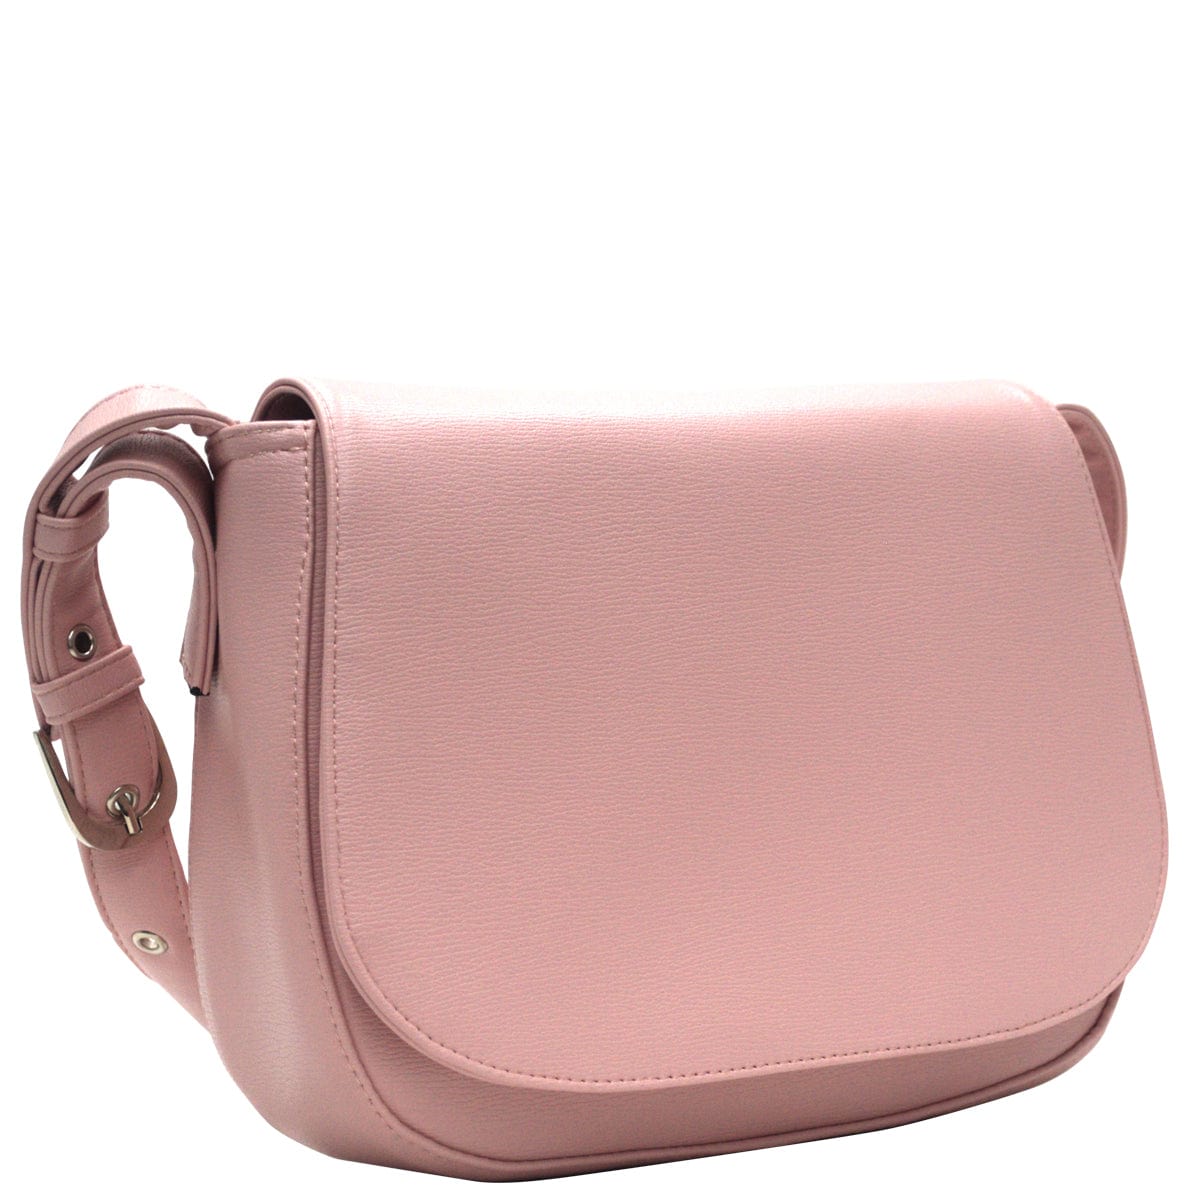 Little Beth Bag - Dusty Pink Leather Look